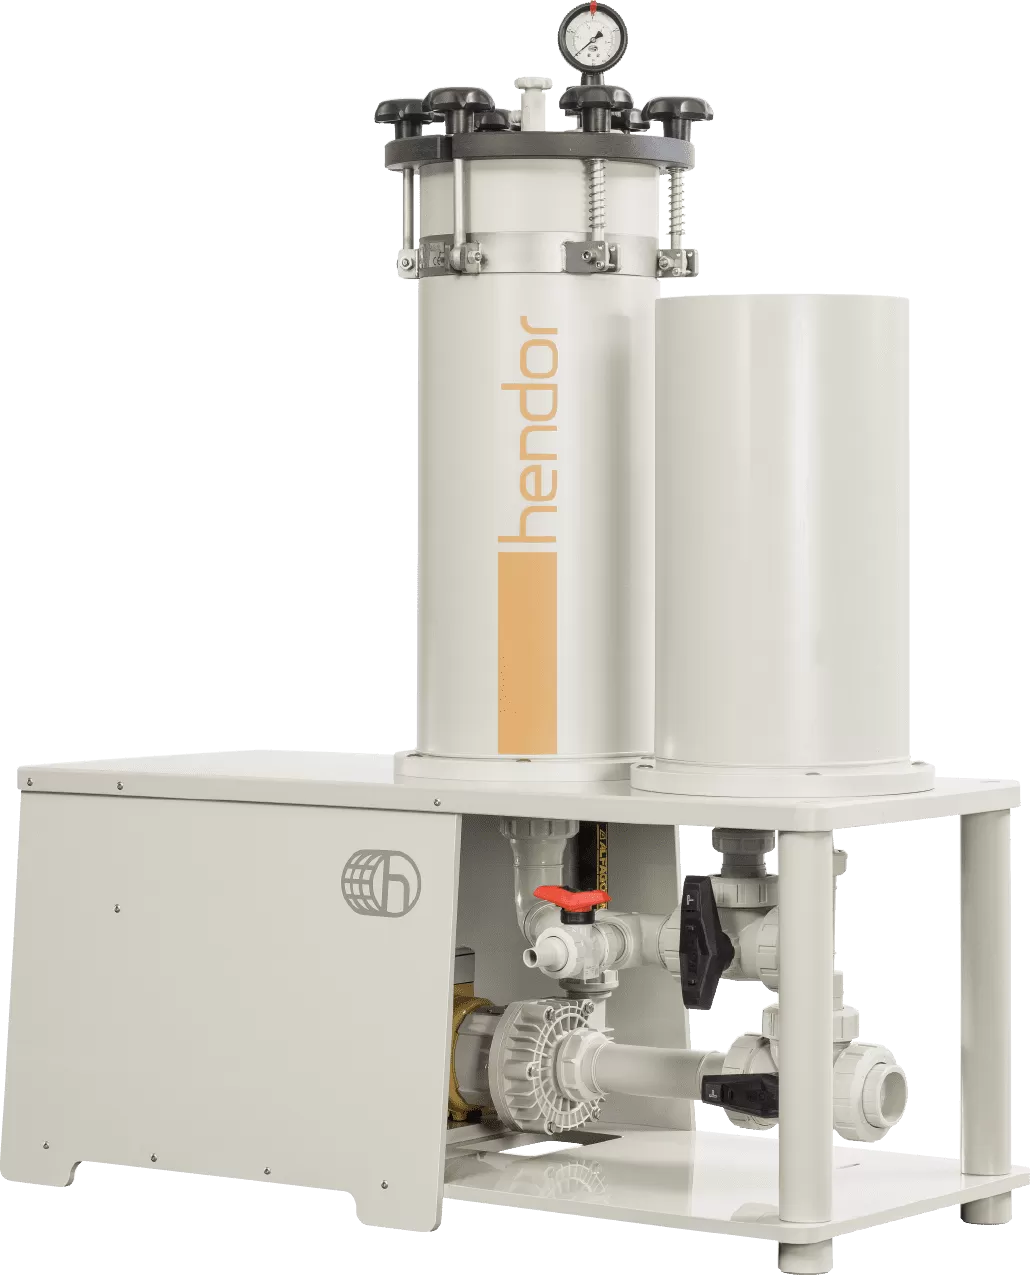 Filtration system series 7 from Hendor 